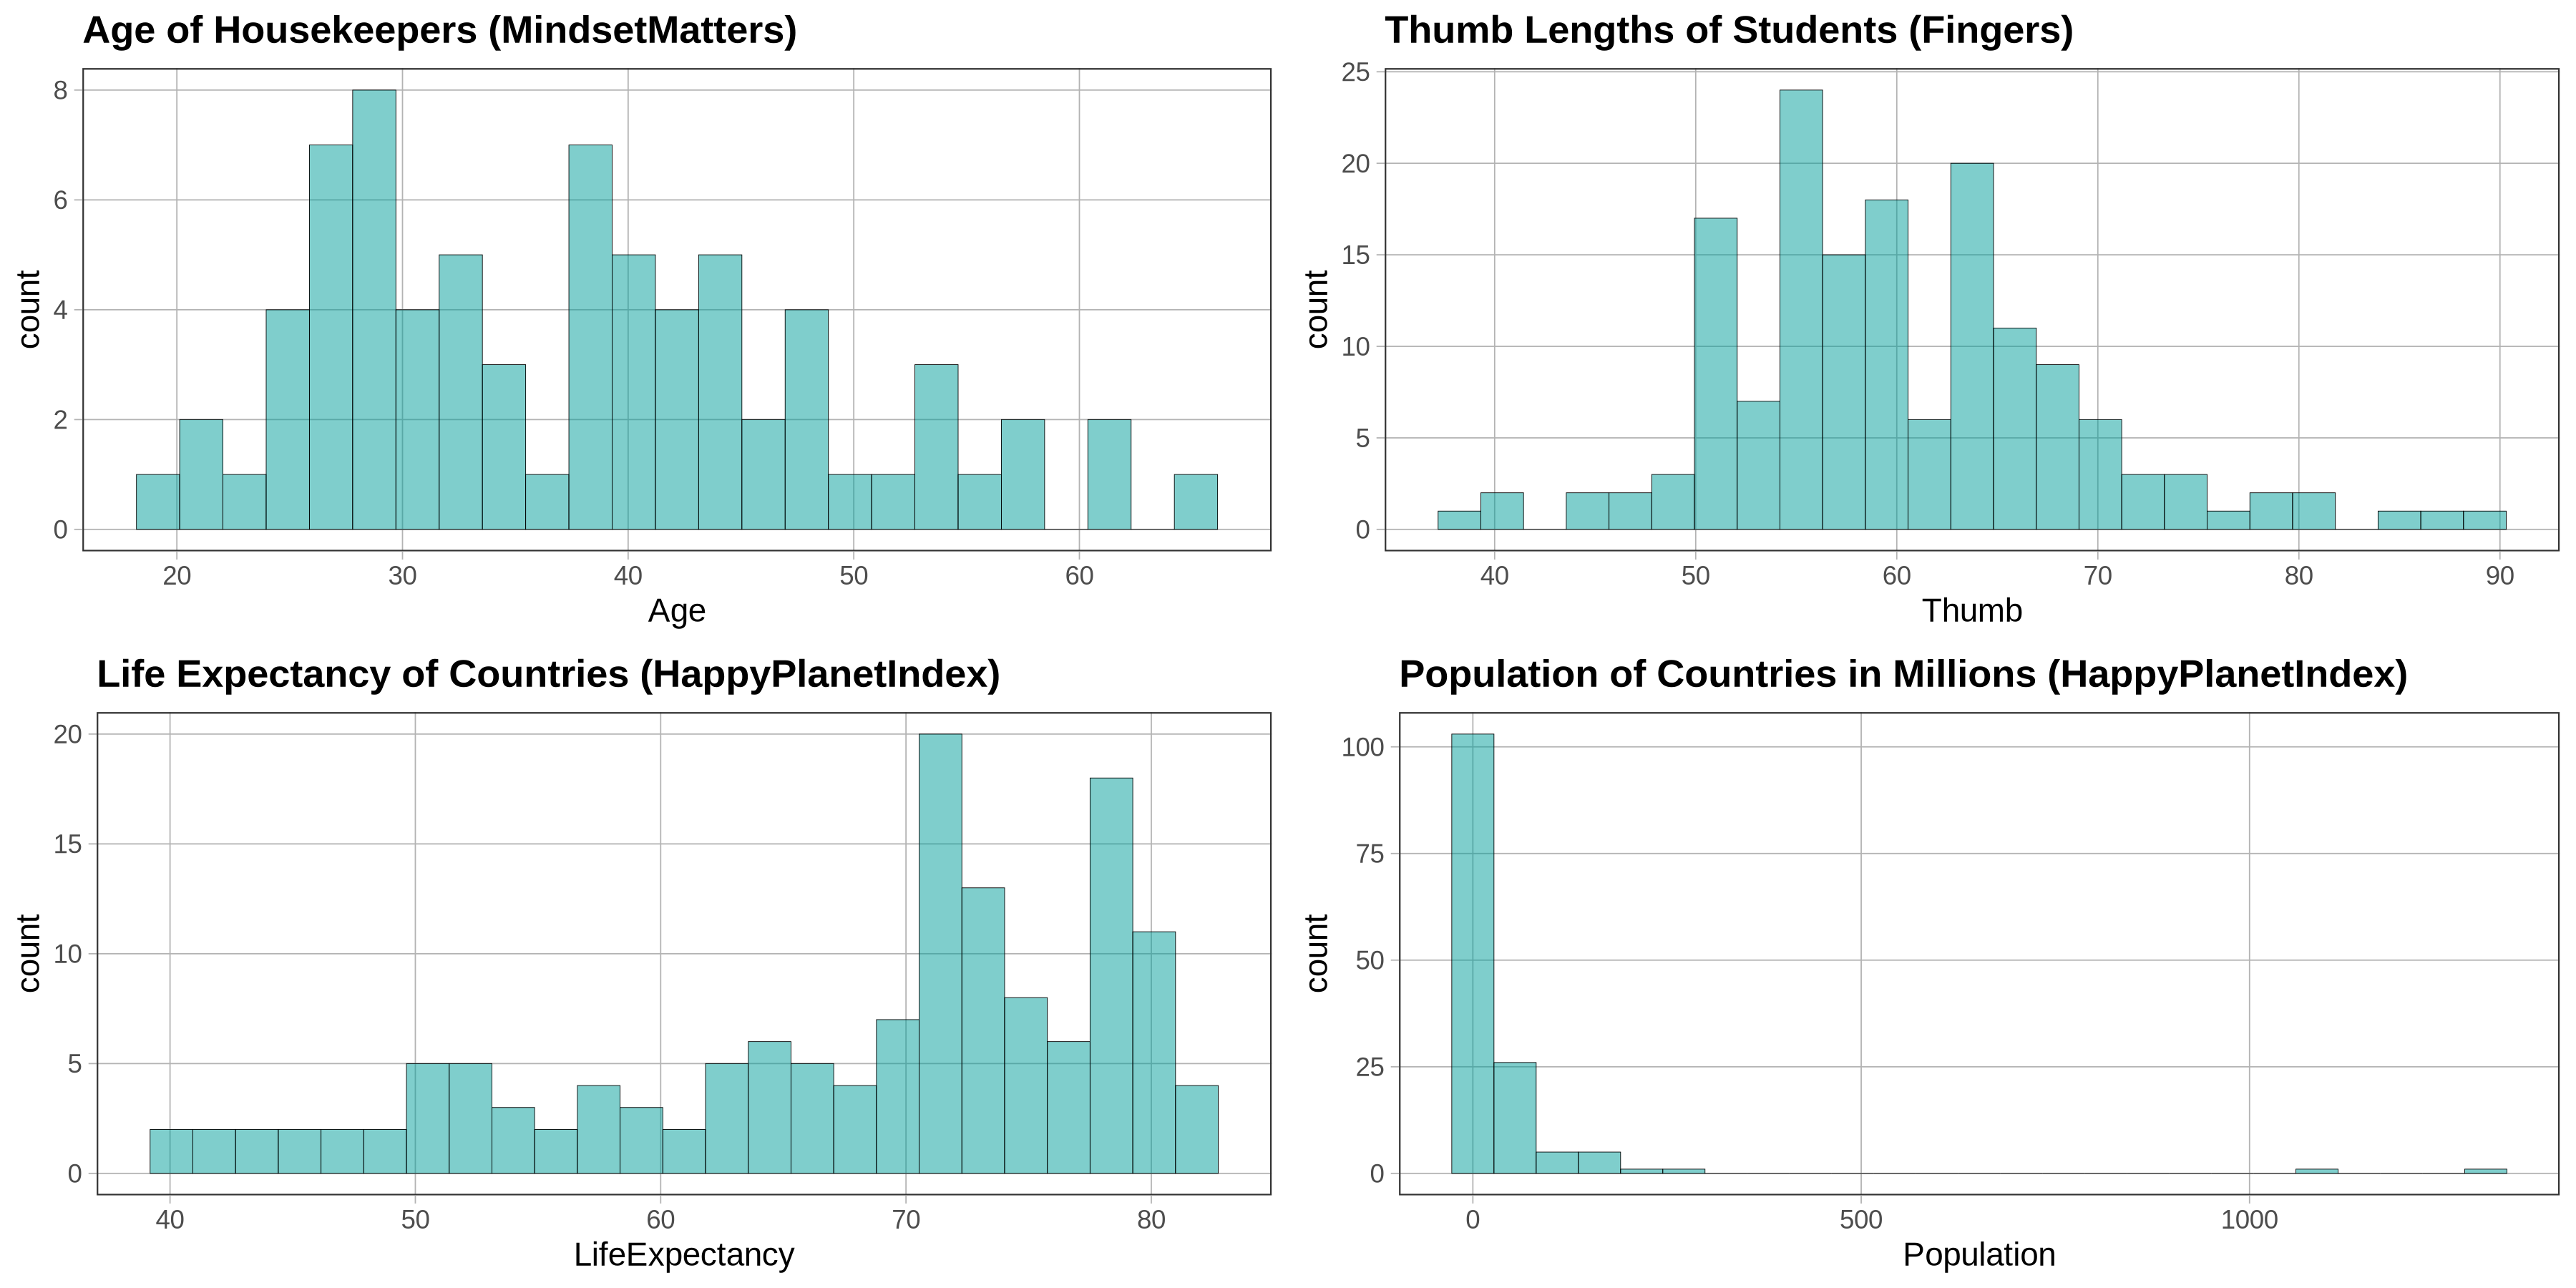 A histogram of the distribution of Thumb in Fingers. Thumb lengths are on the x-axis, and the count is on the y-axis.